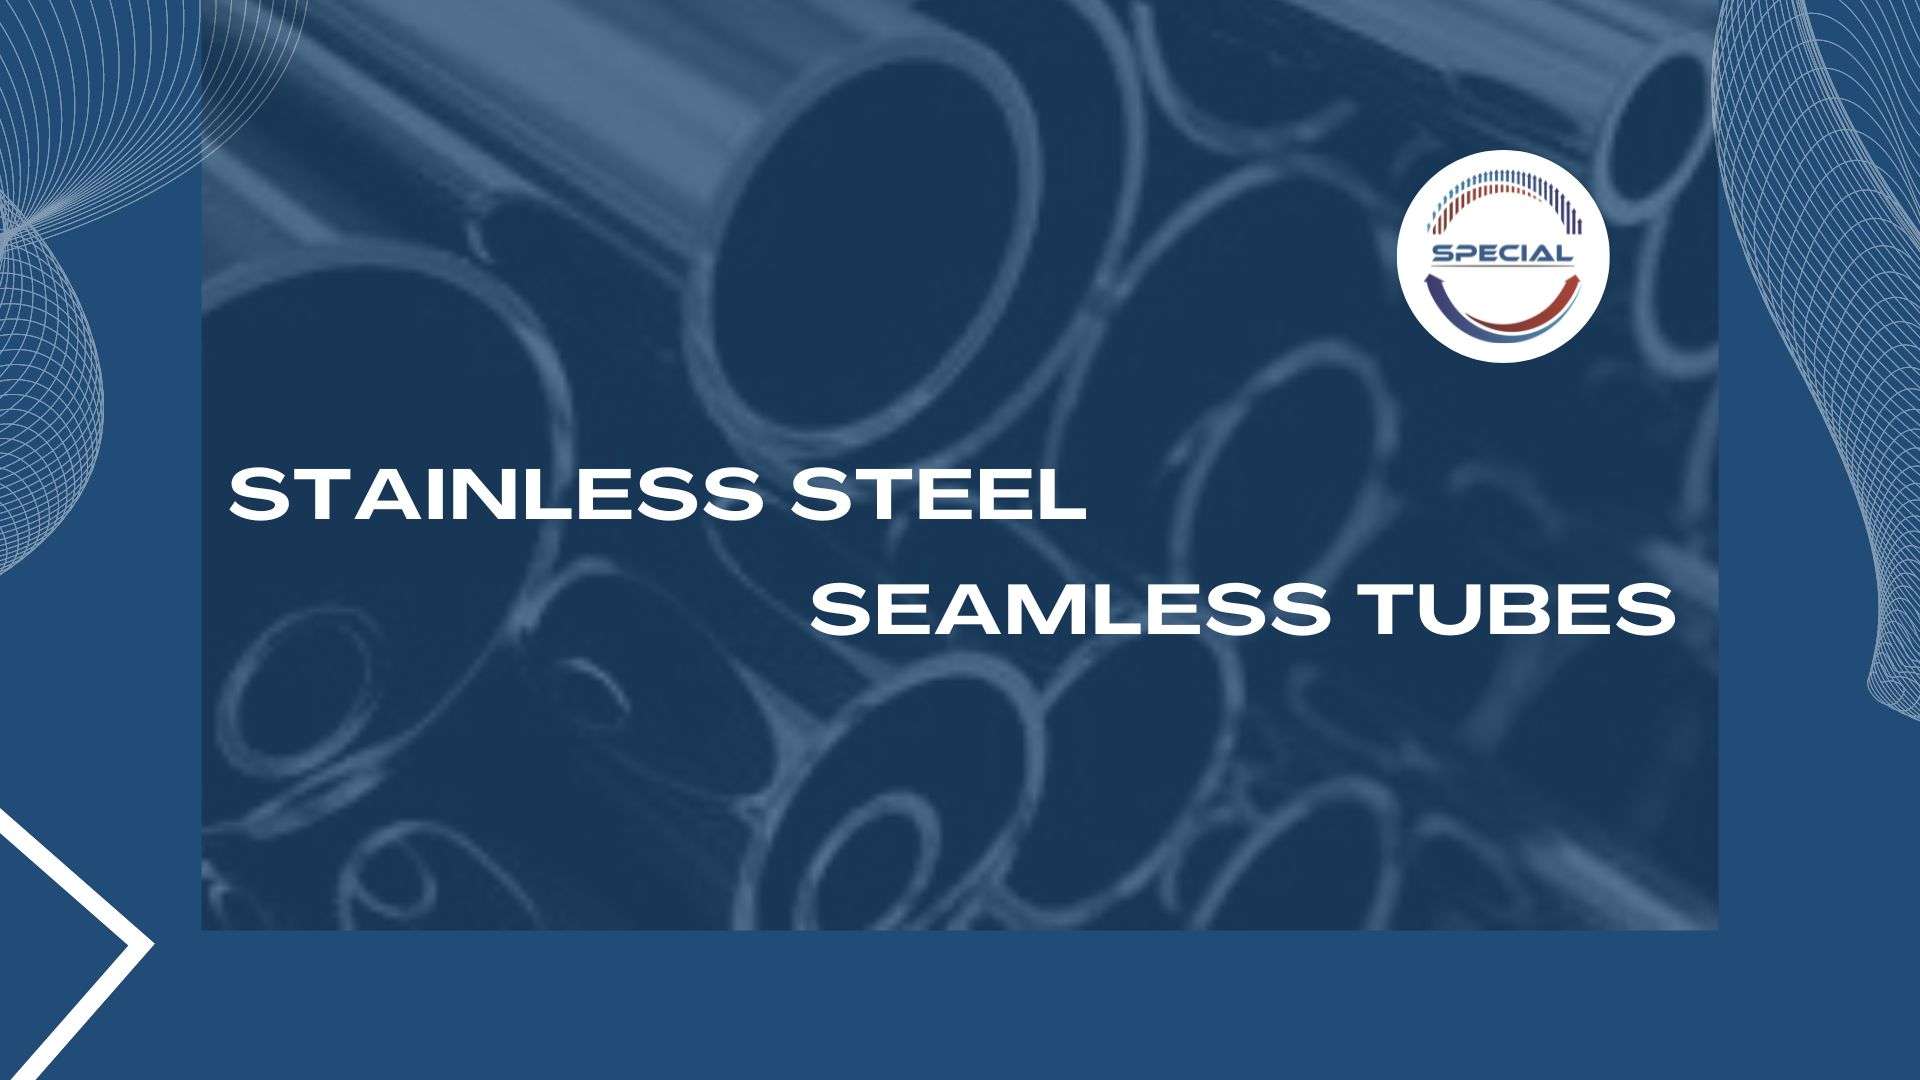 Special metals stainless steel seamless tubes